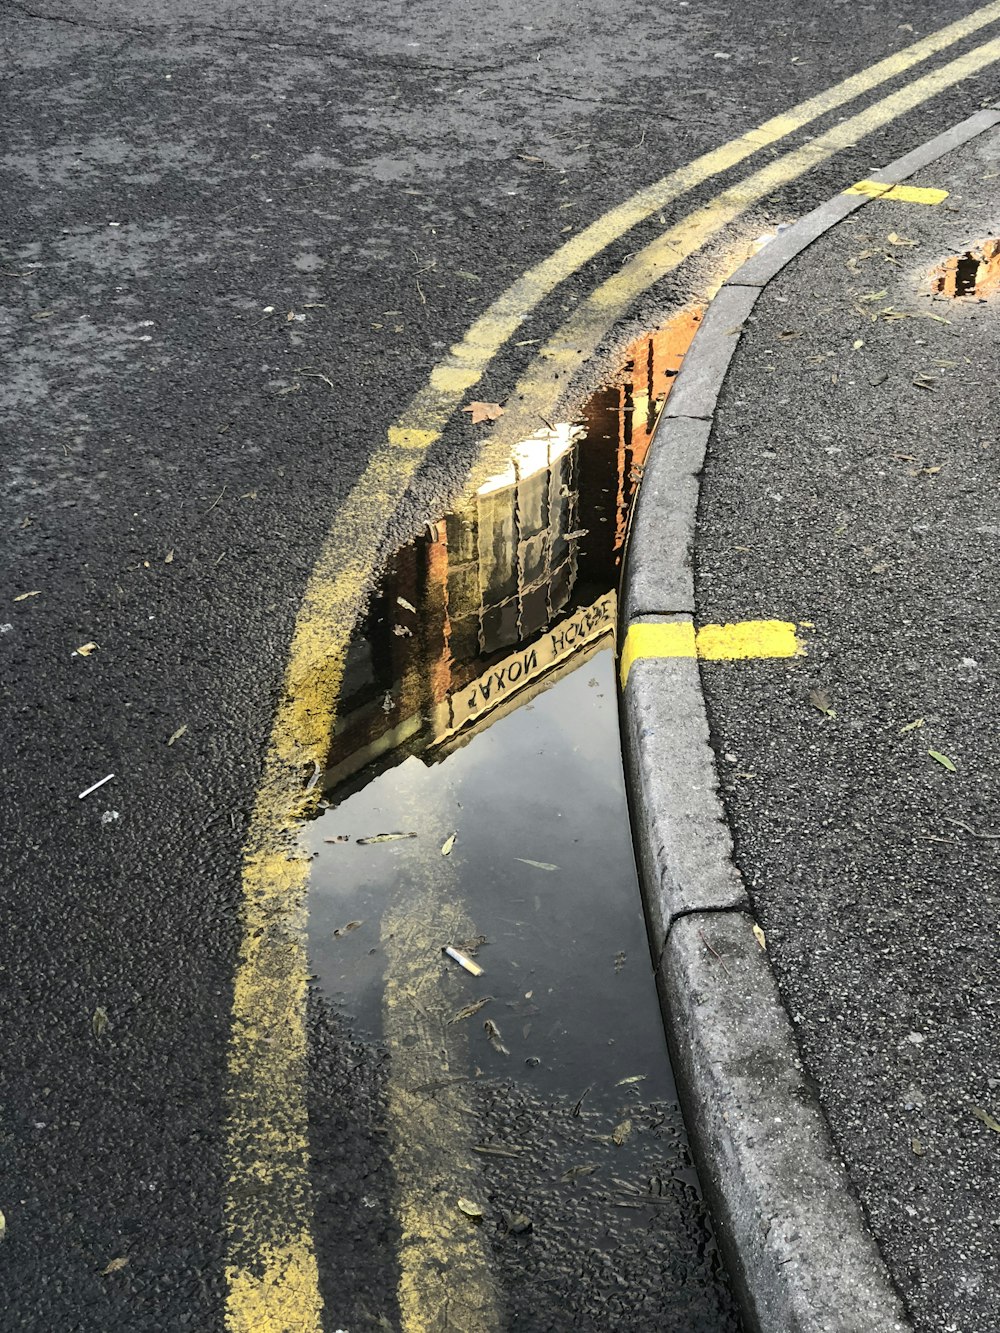 a reflection of a train in a puddle of water